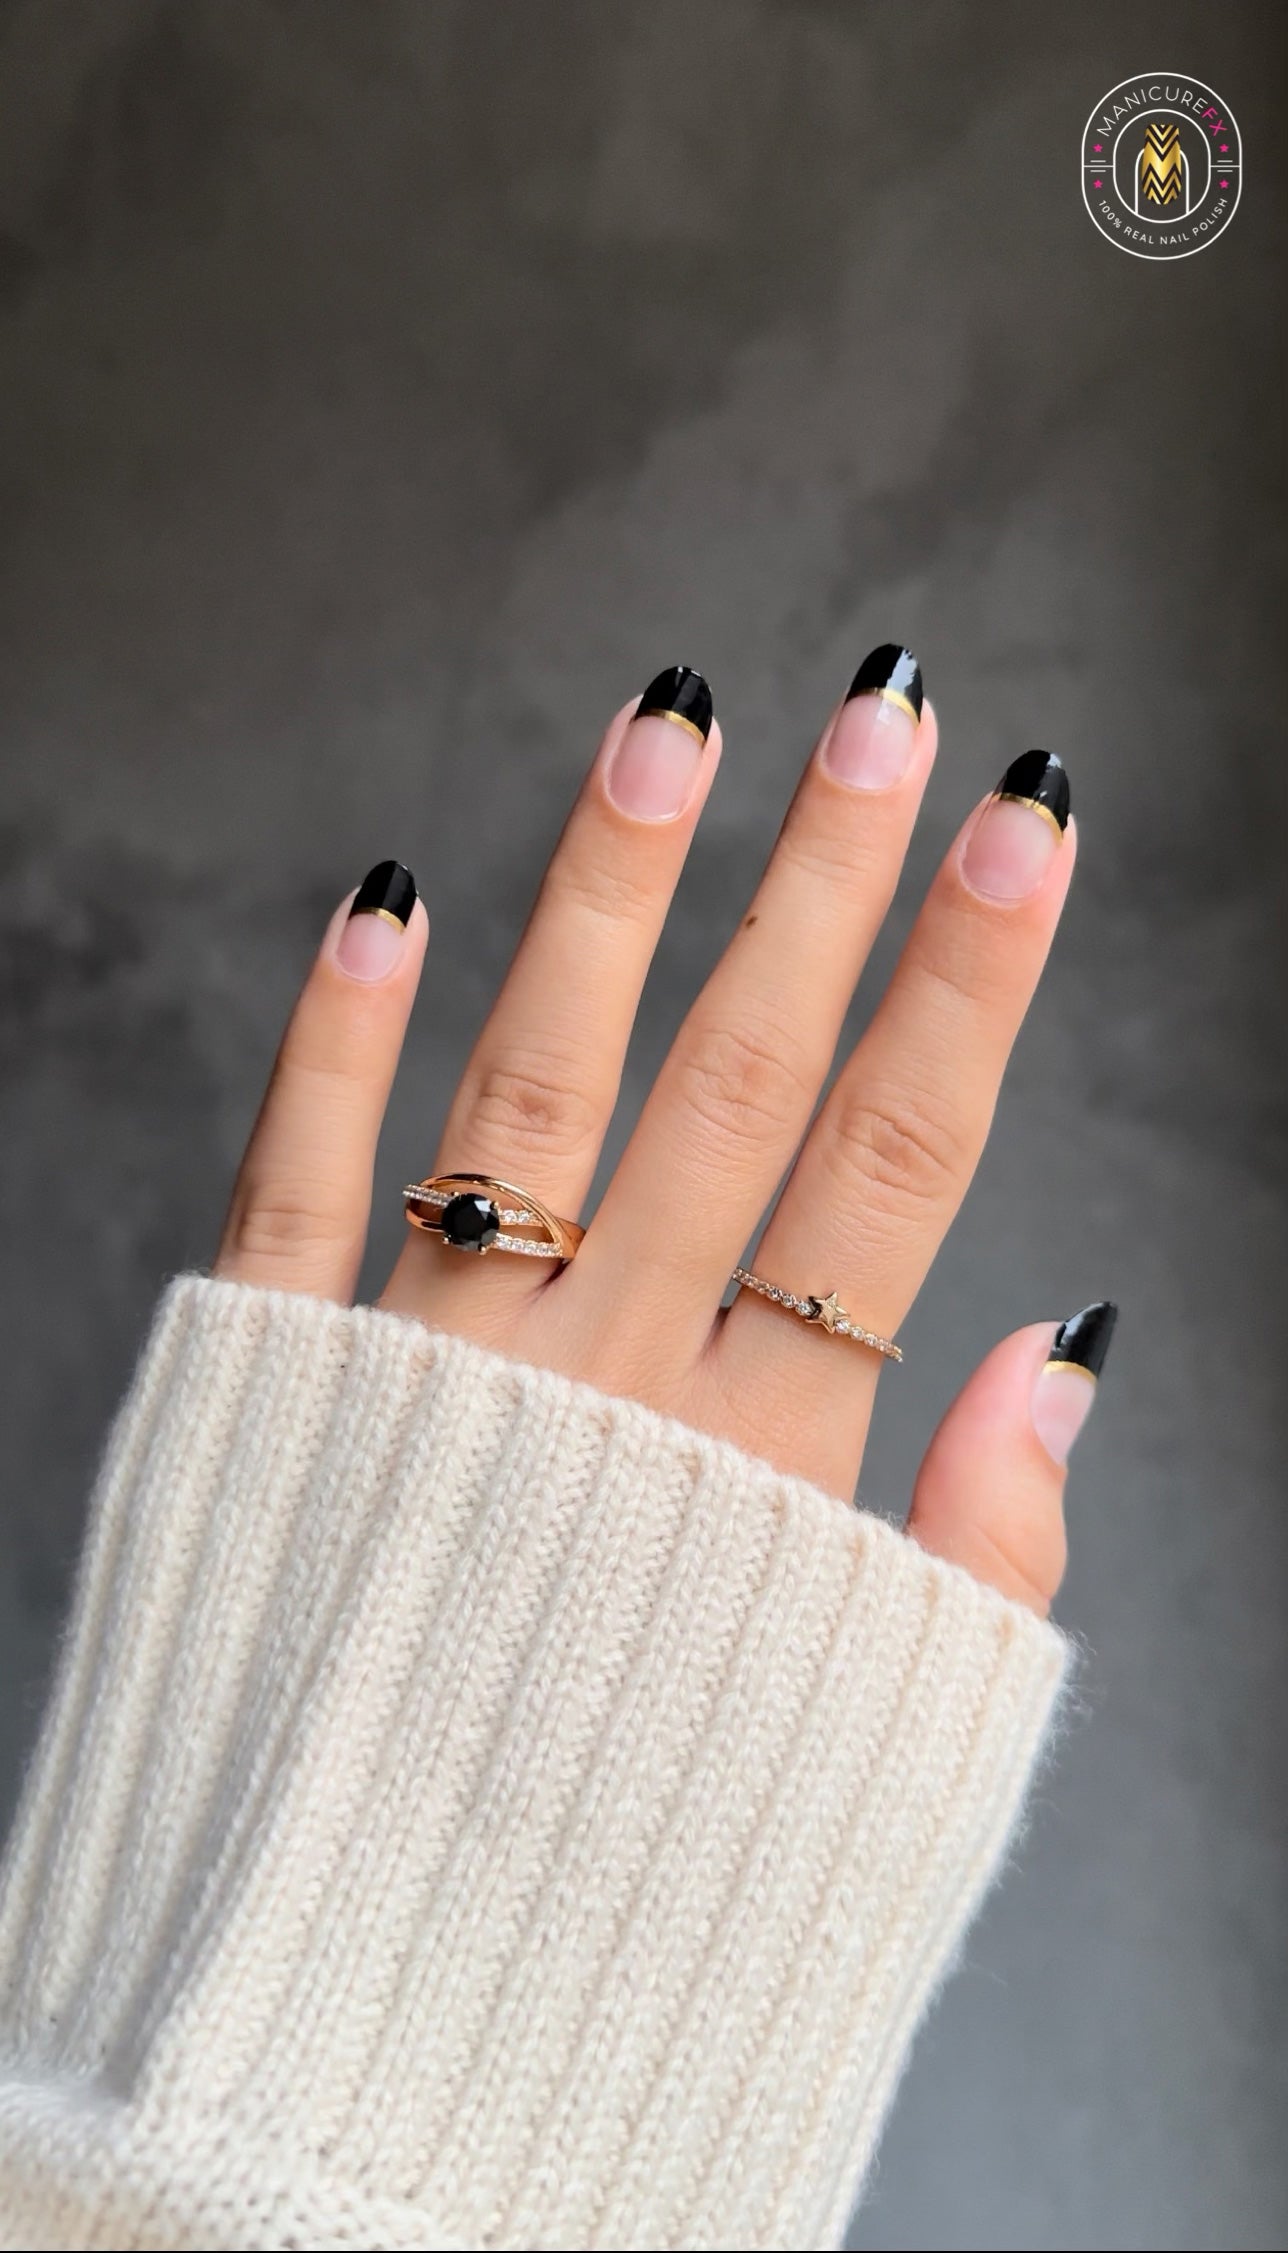 Black Tip French Manicure - Nail Wraps (Standard)